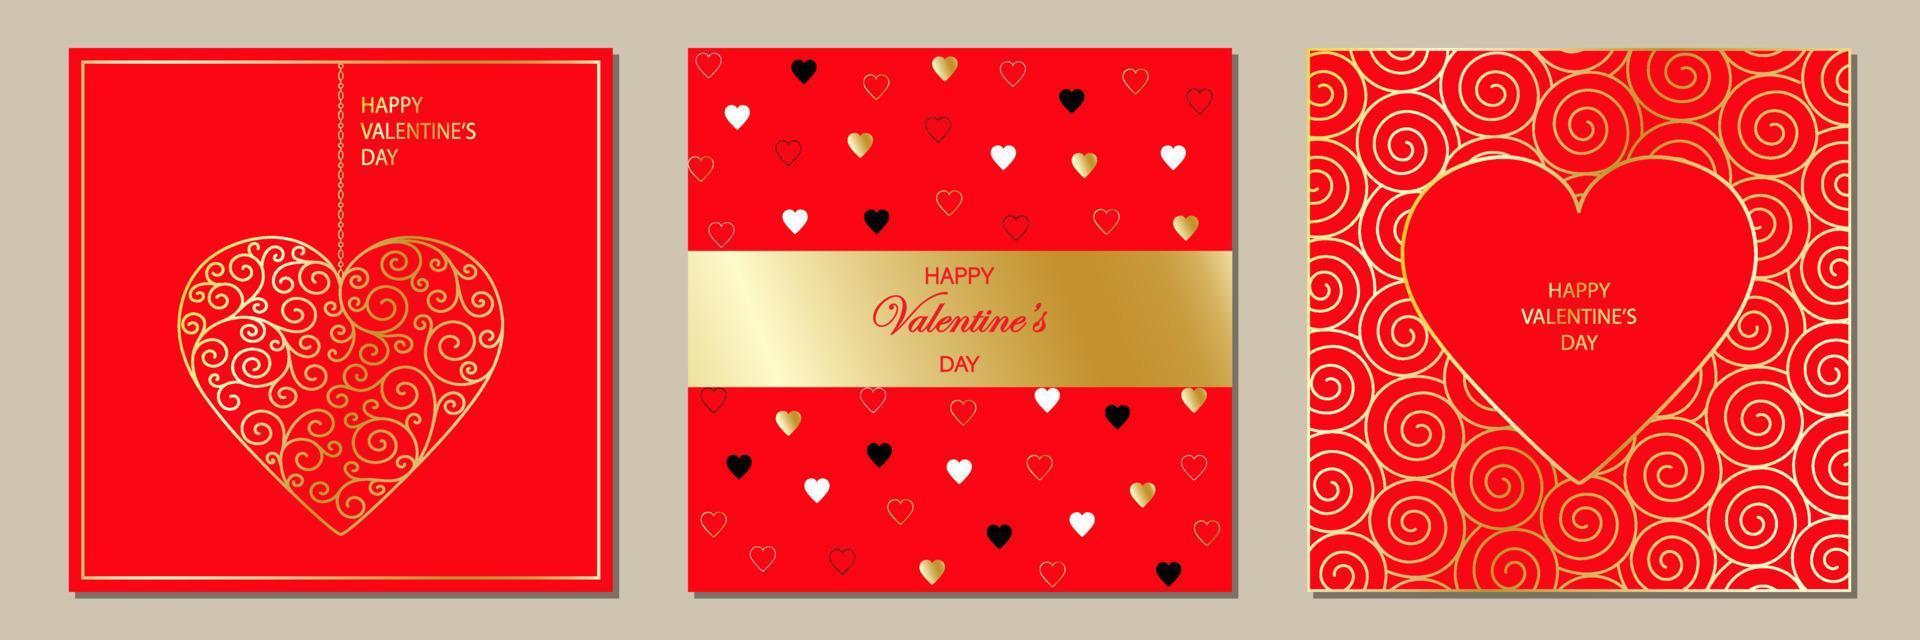 Happy Valentine's Day. Set of greeting cards. vector